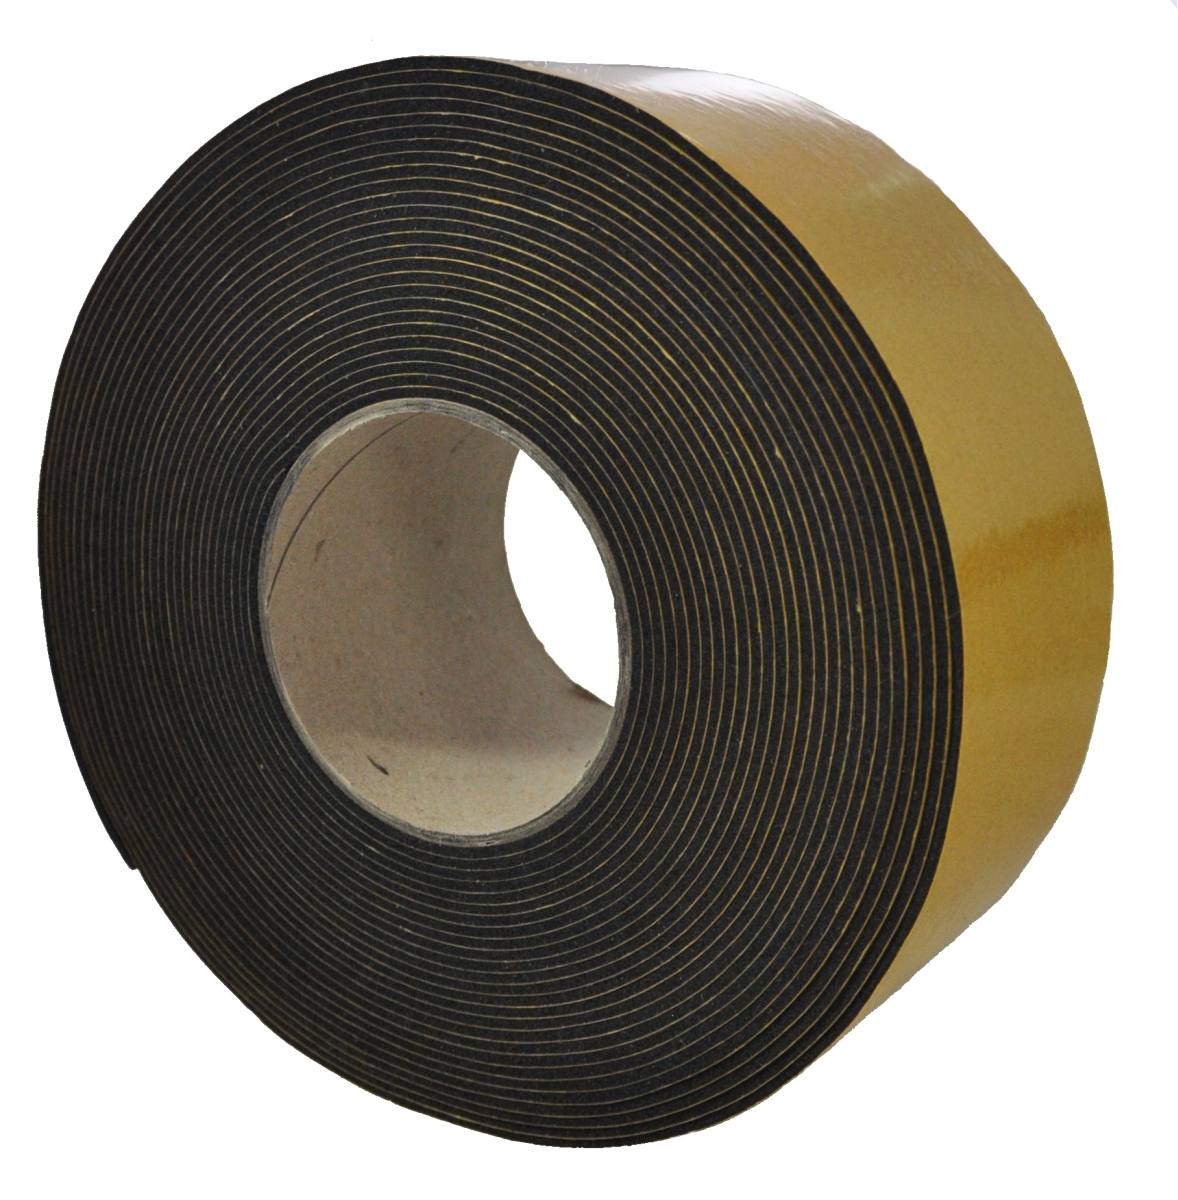 S-K-S EPDM 3mmx75mmx10m black self-adhesive on one side